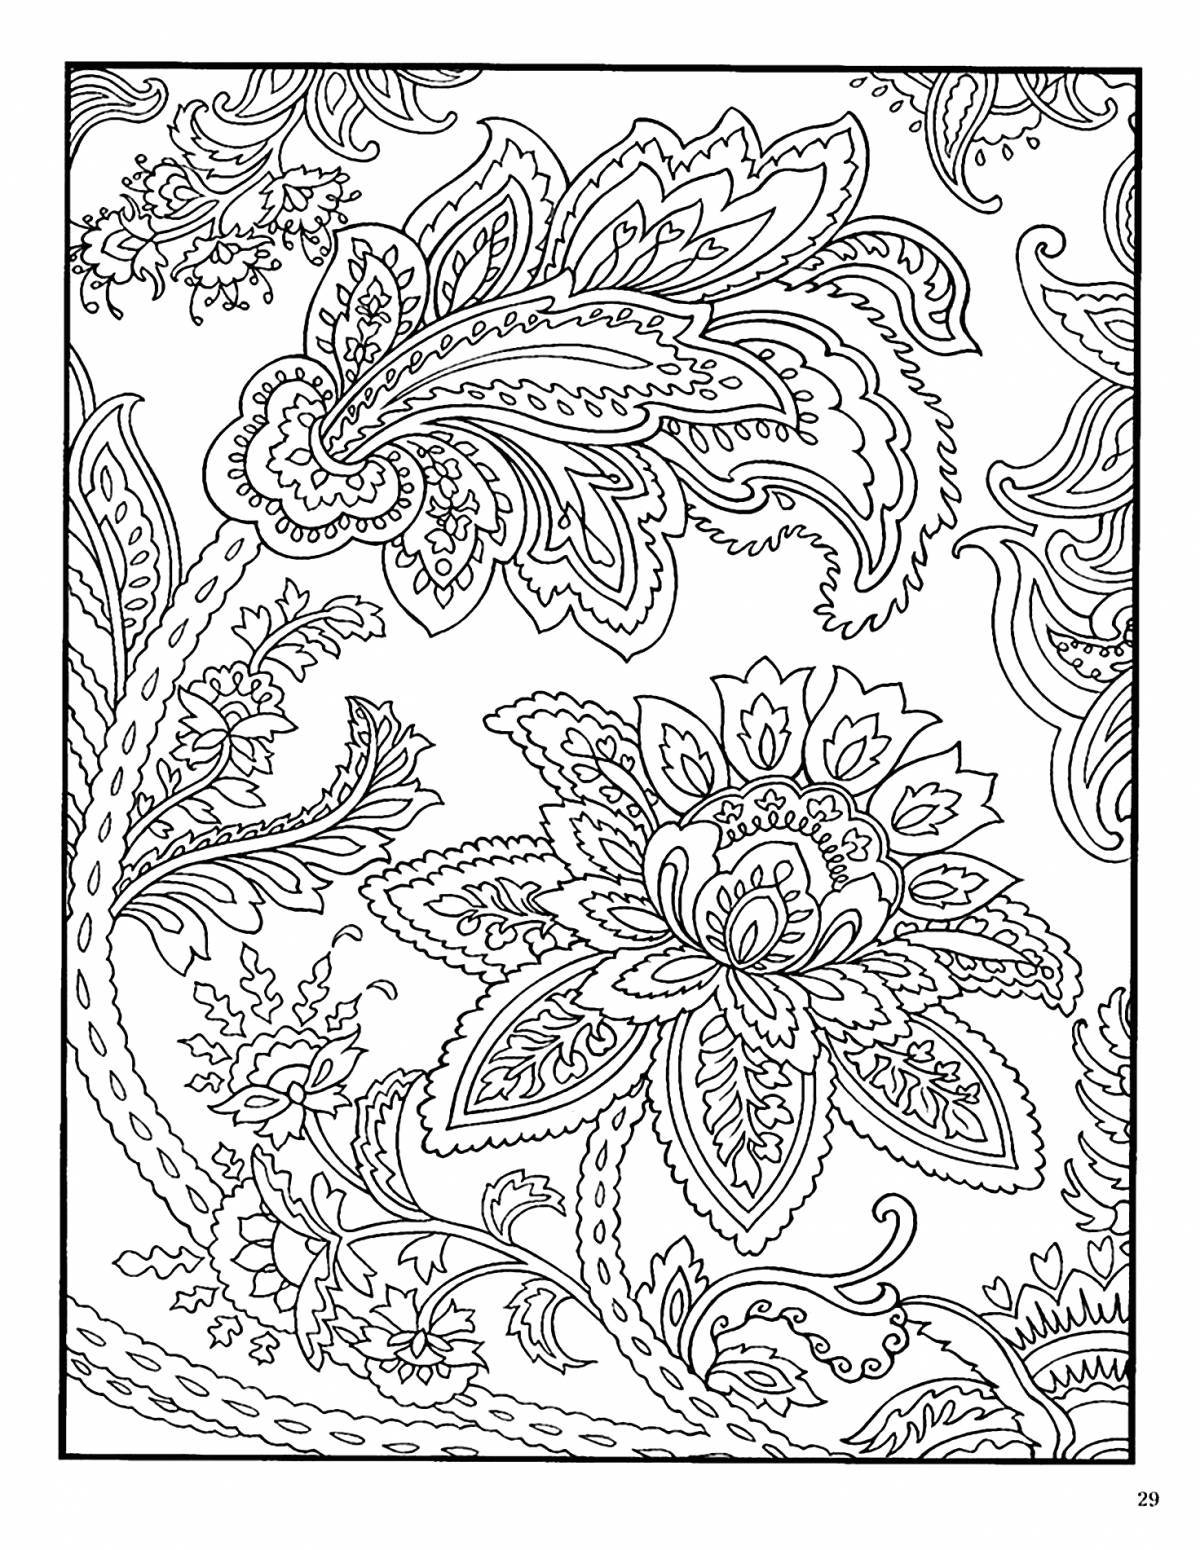 Consolation coloring page